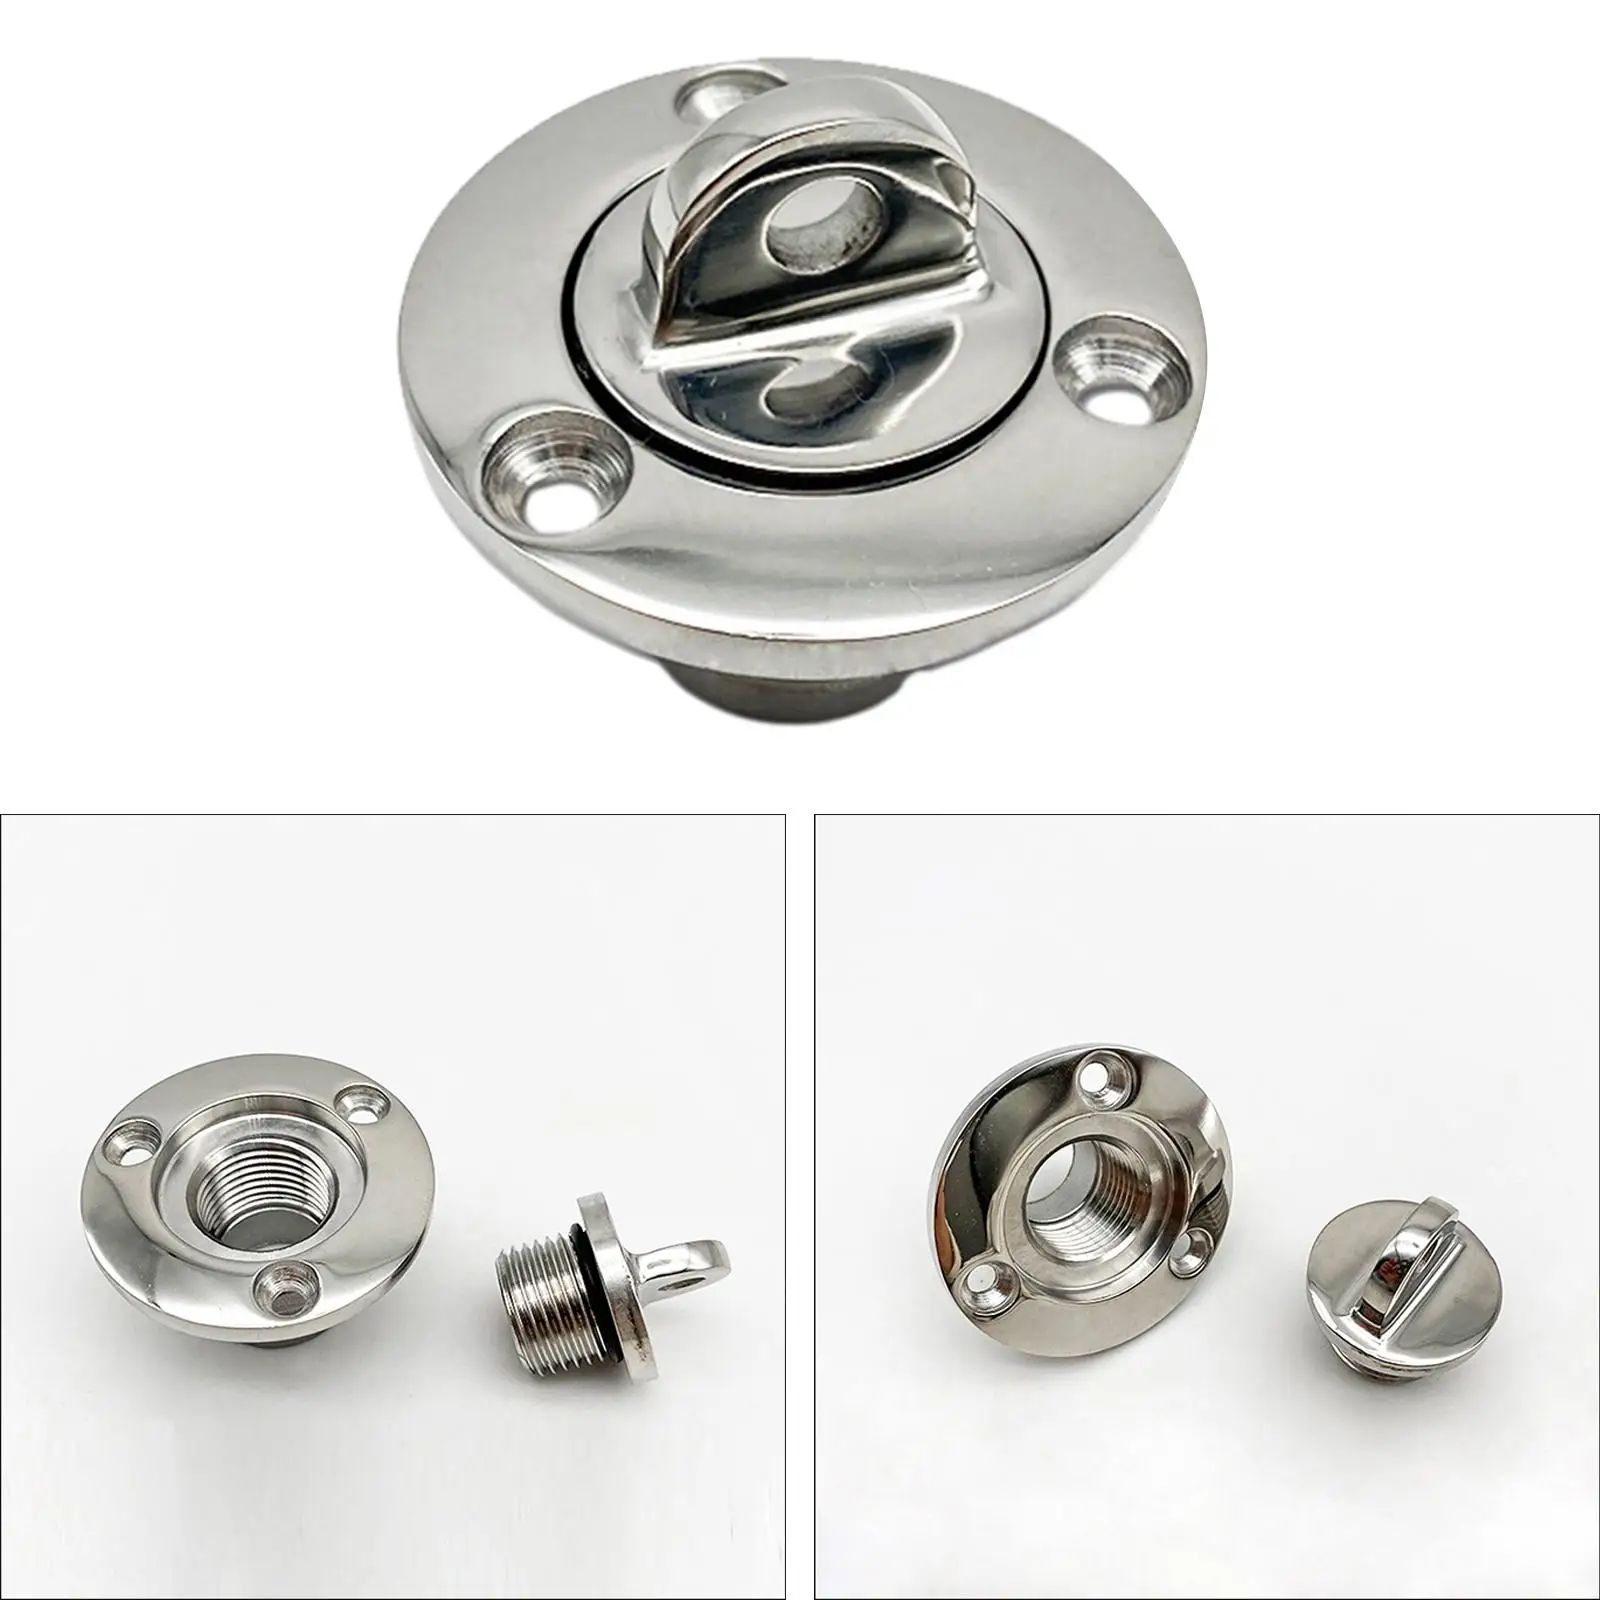 Marine Boat Drain Plug Boat Transom Drain Plug Rustproof 1 inch Stainless Steel Bung Drain Outlet for Ship Dinghy Yacht Canoe